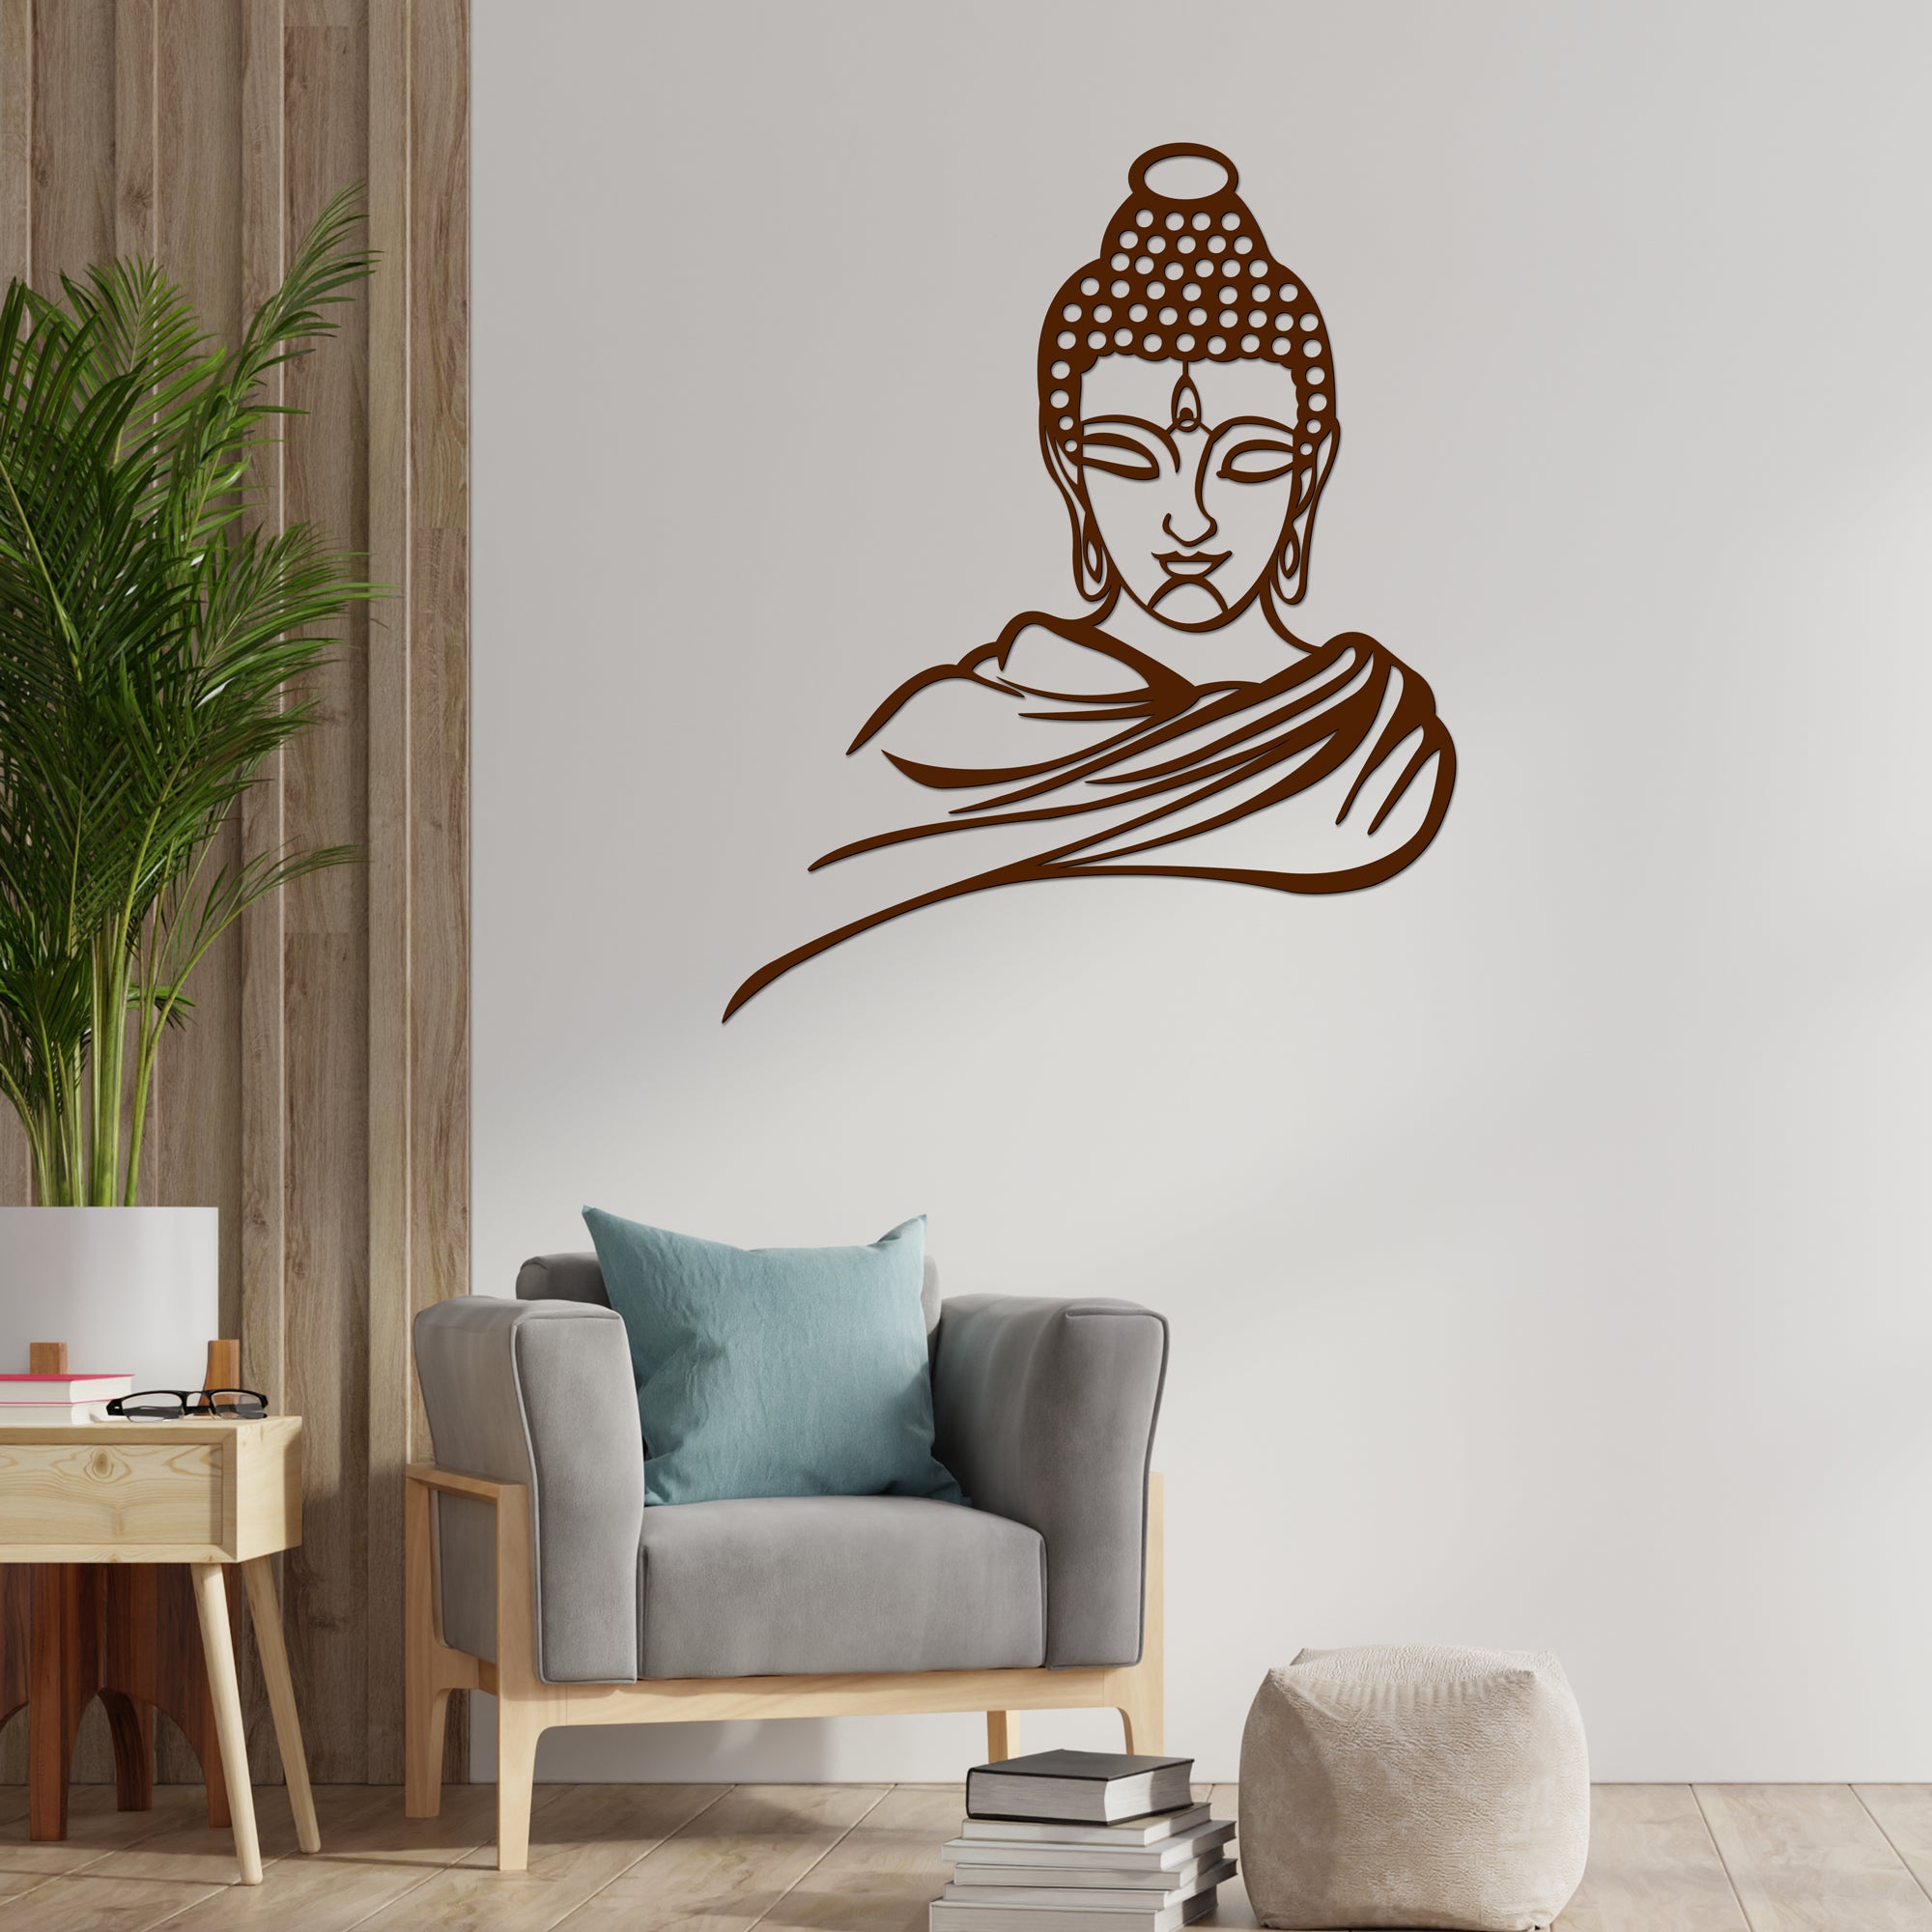 Quality Wooden Wall Hanging of Lord Buddha